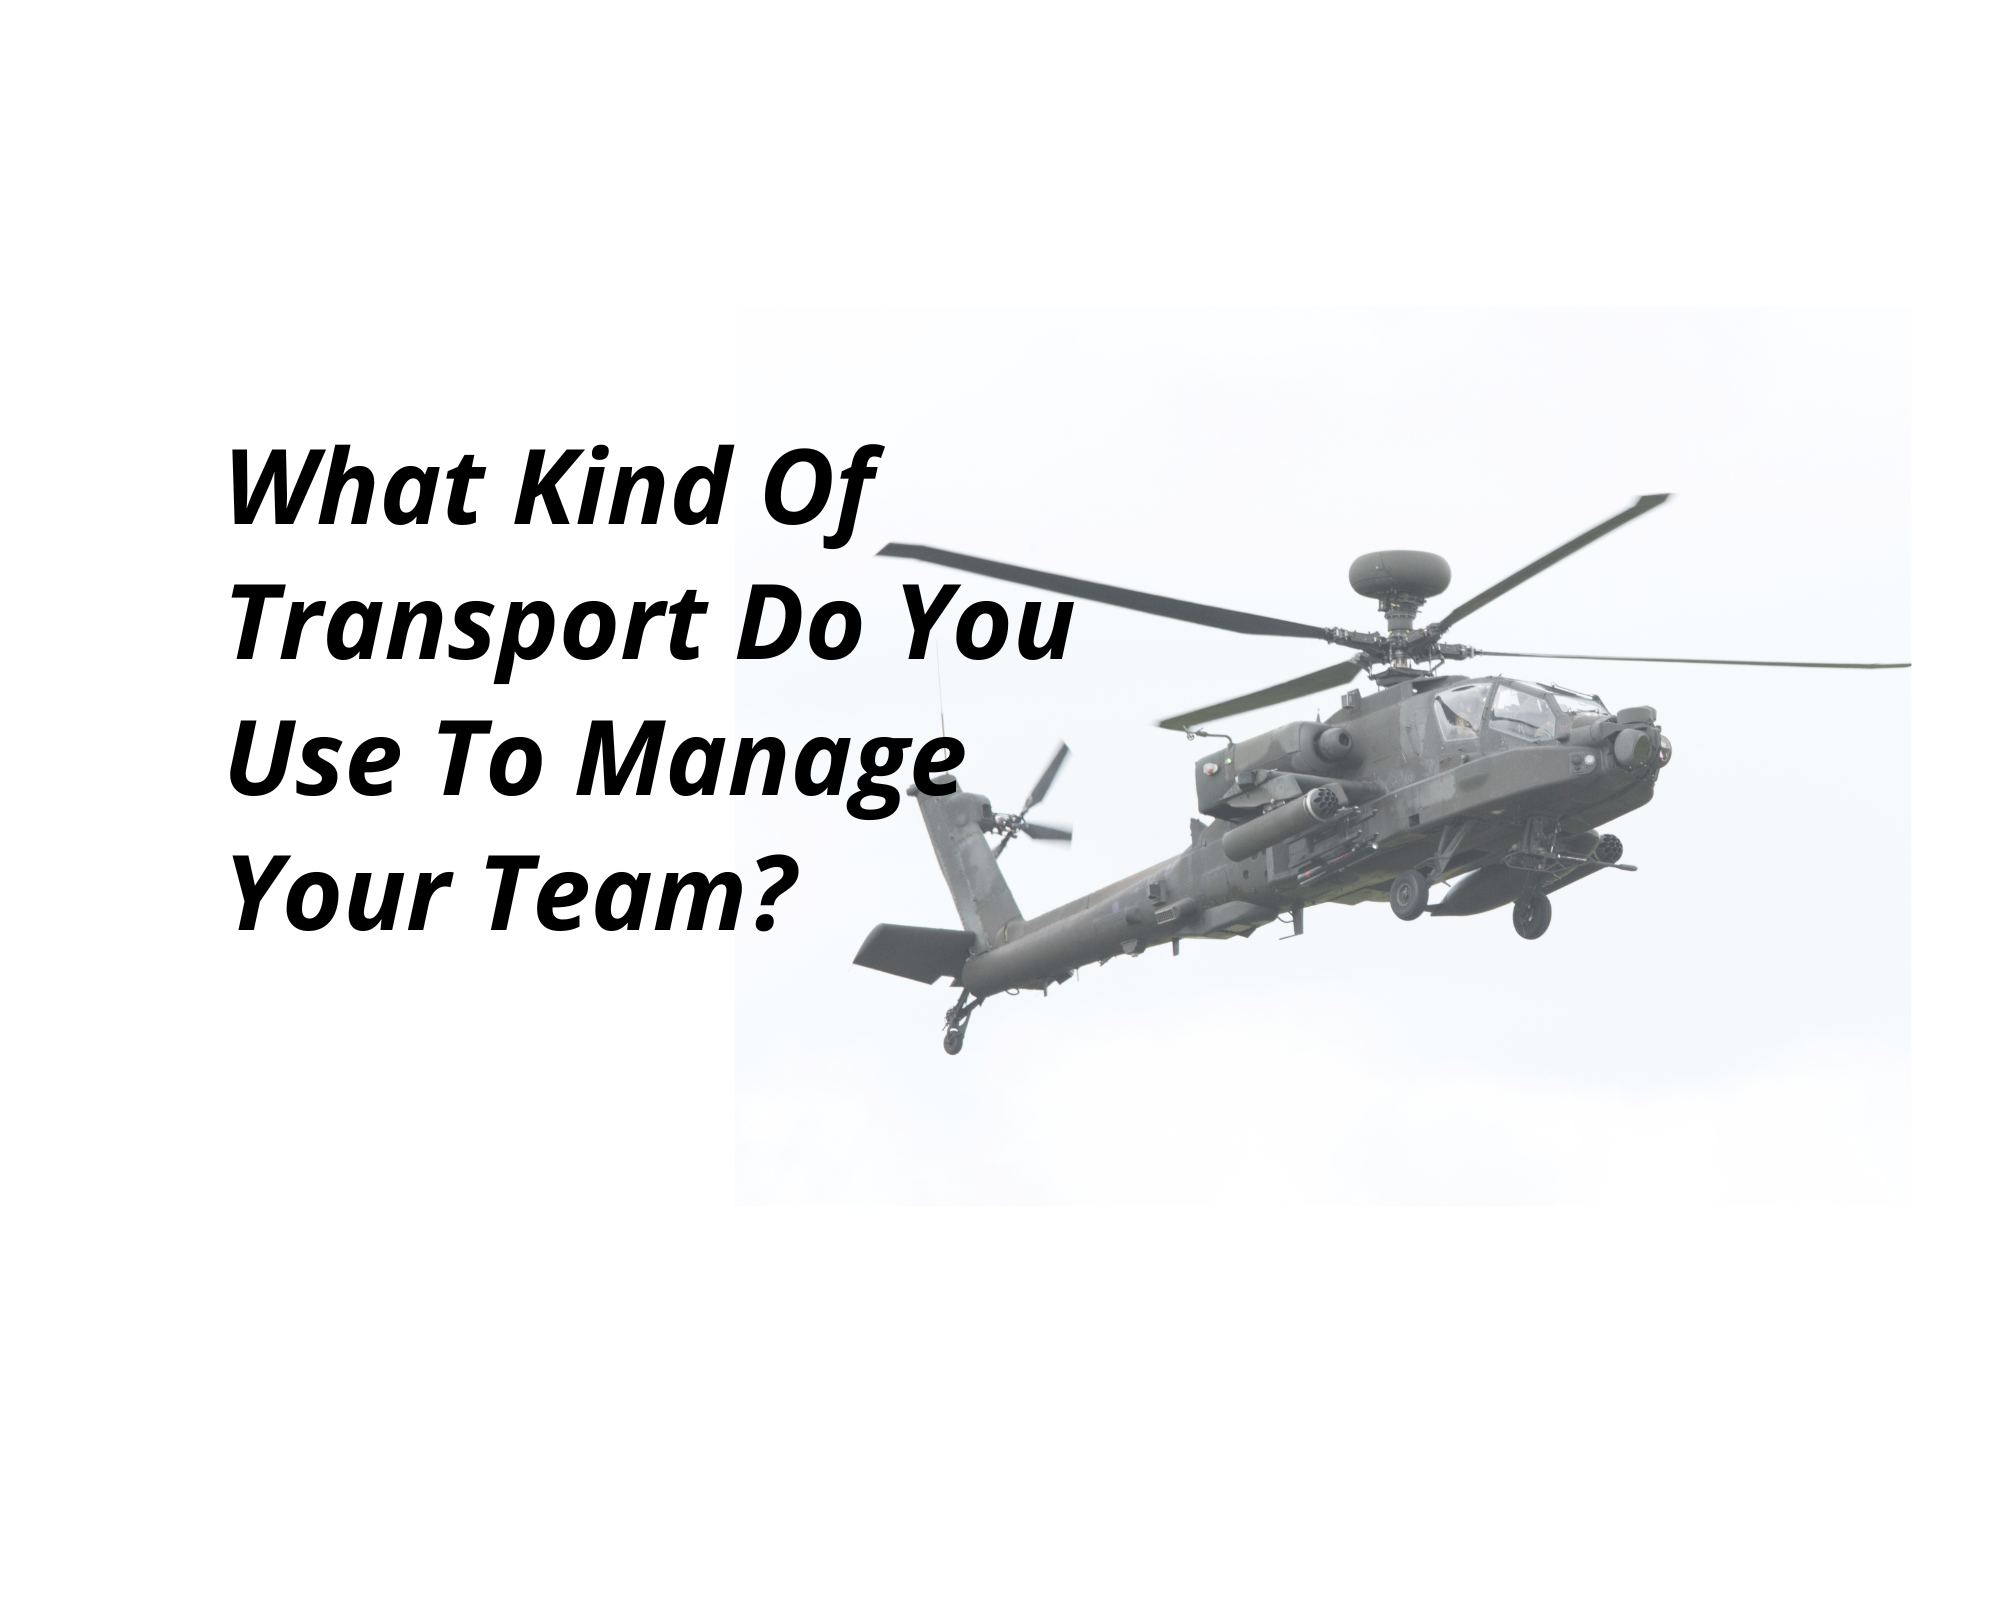 What Kind Of Transport Do You Use To Manage Your Team?